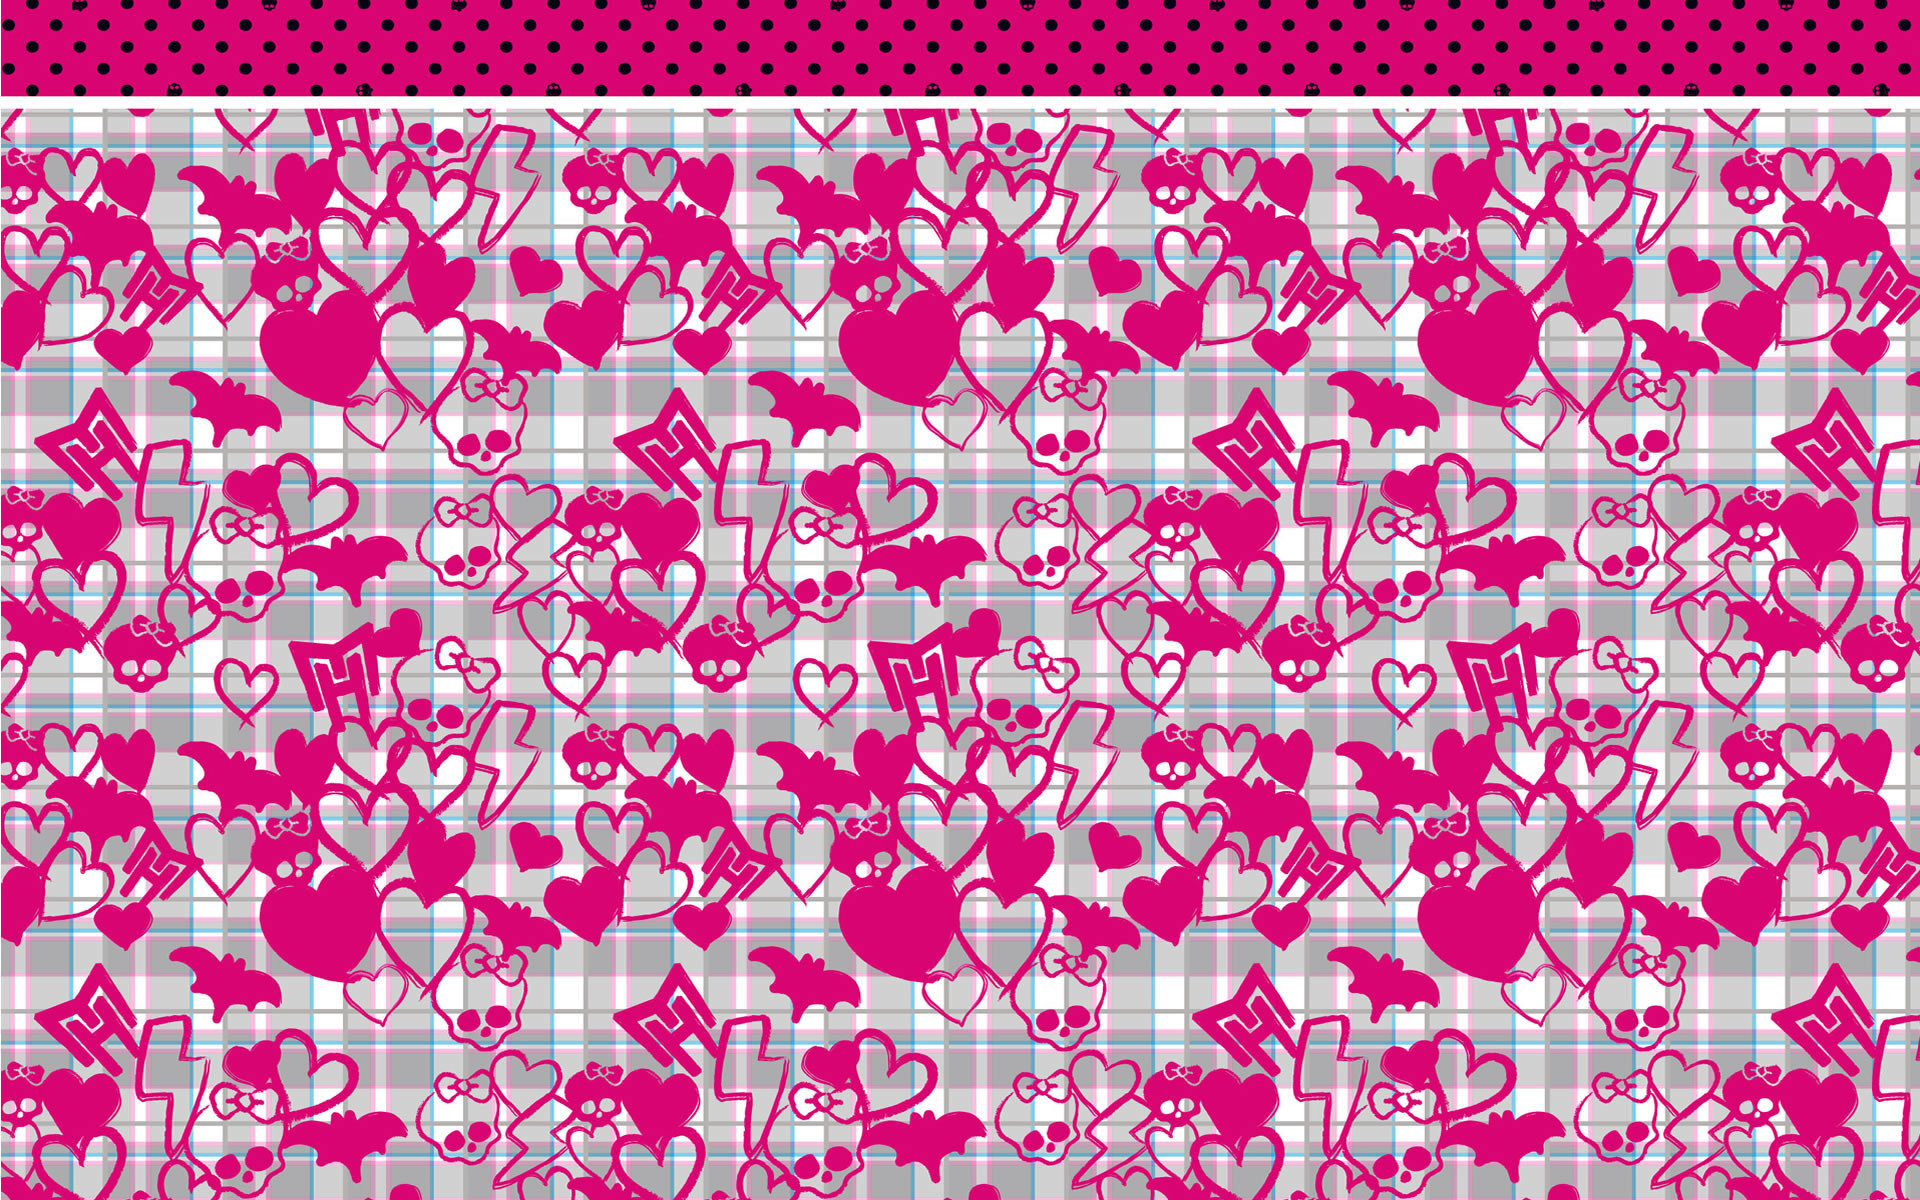 1920x1200 monster high background patterns - Google Search